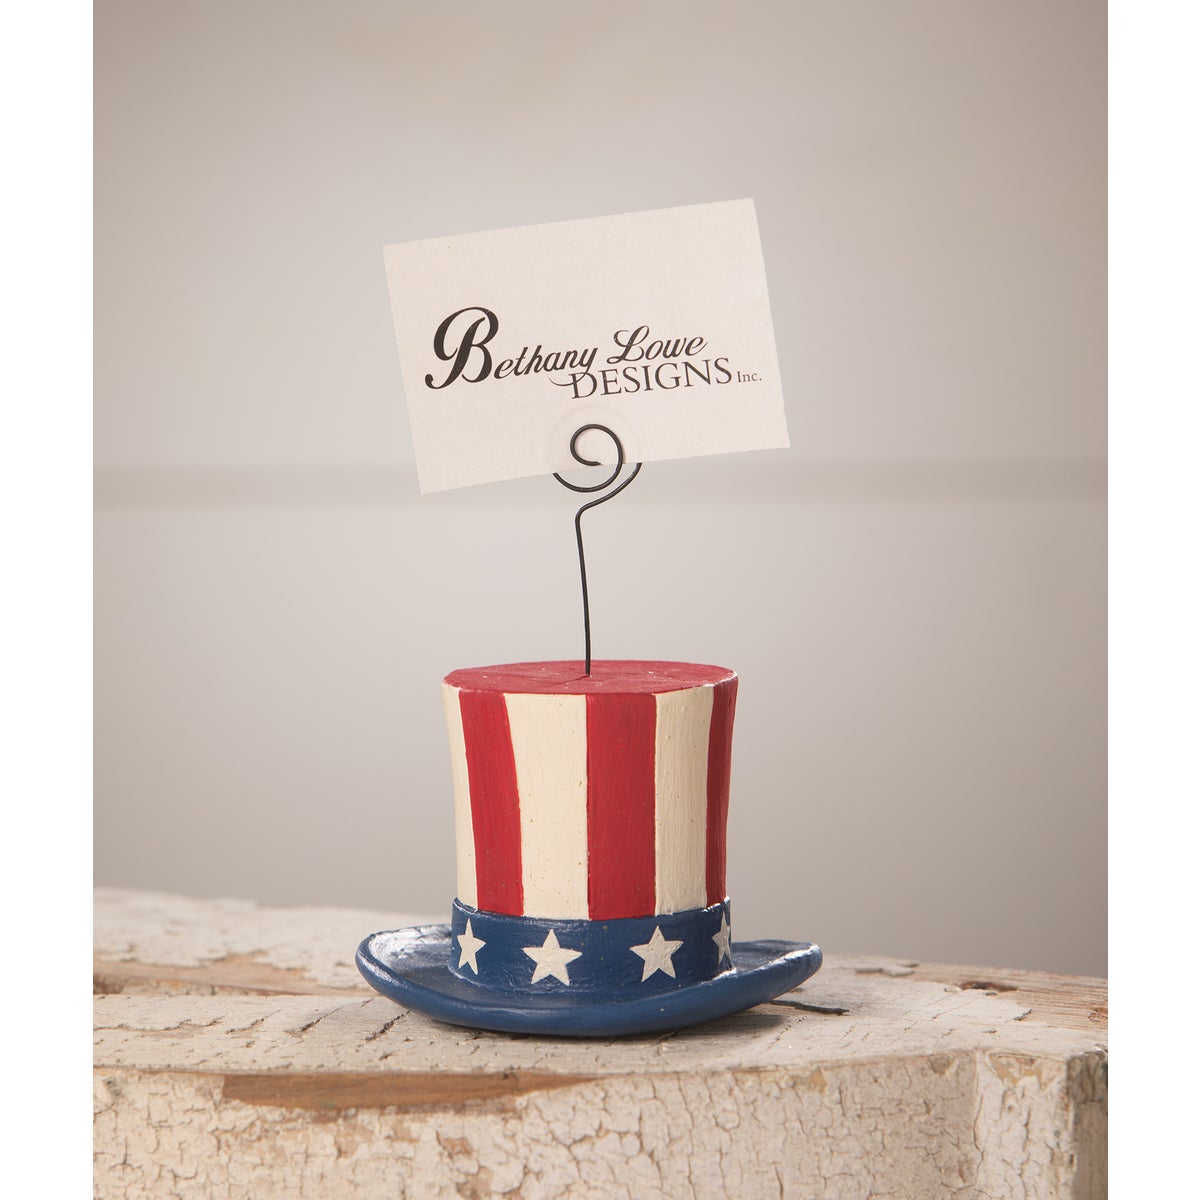 Uncle Sam Top Hat Ornament & Place Card Holder